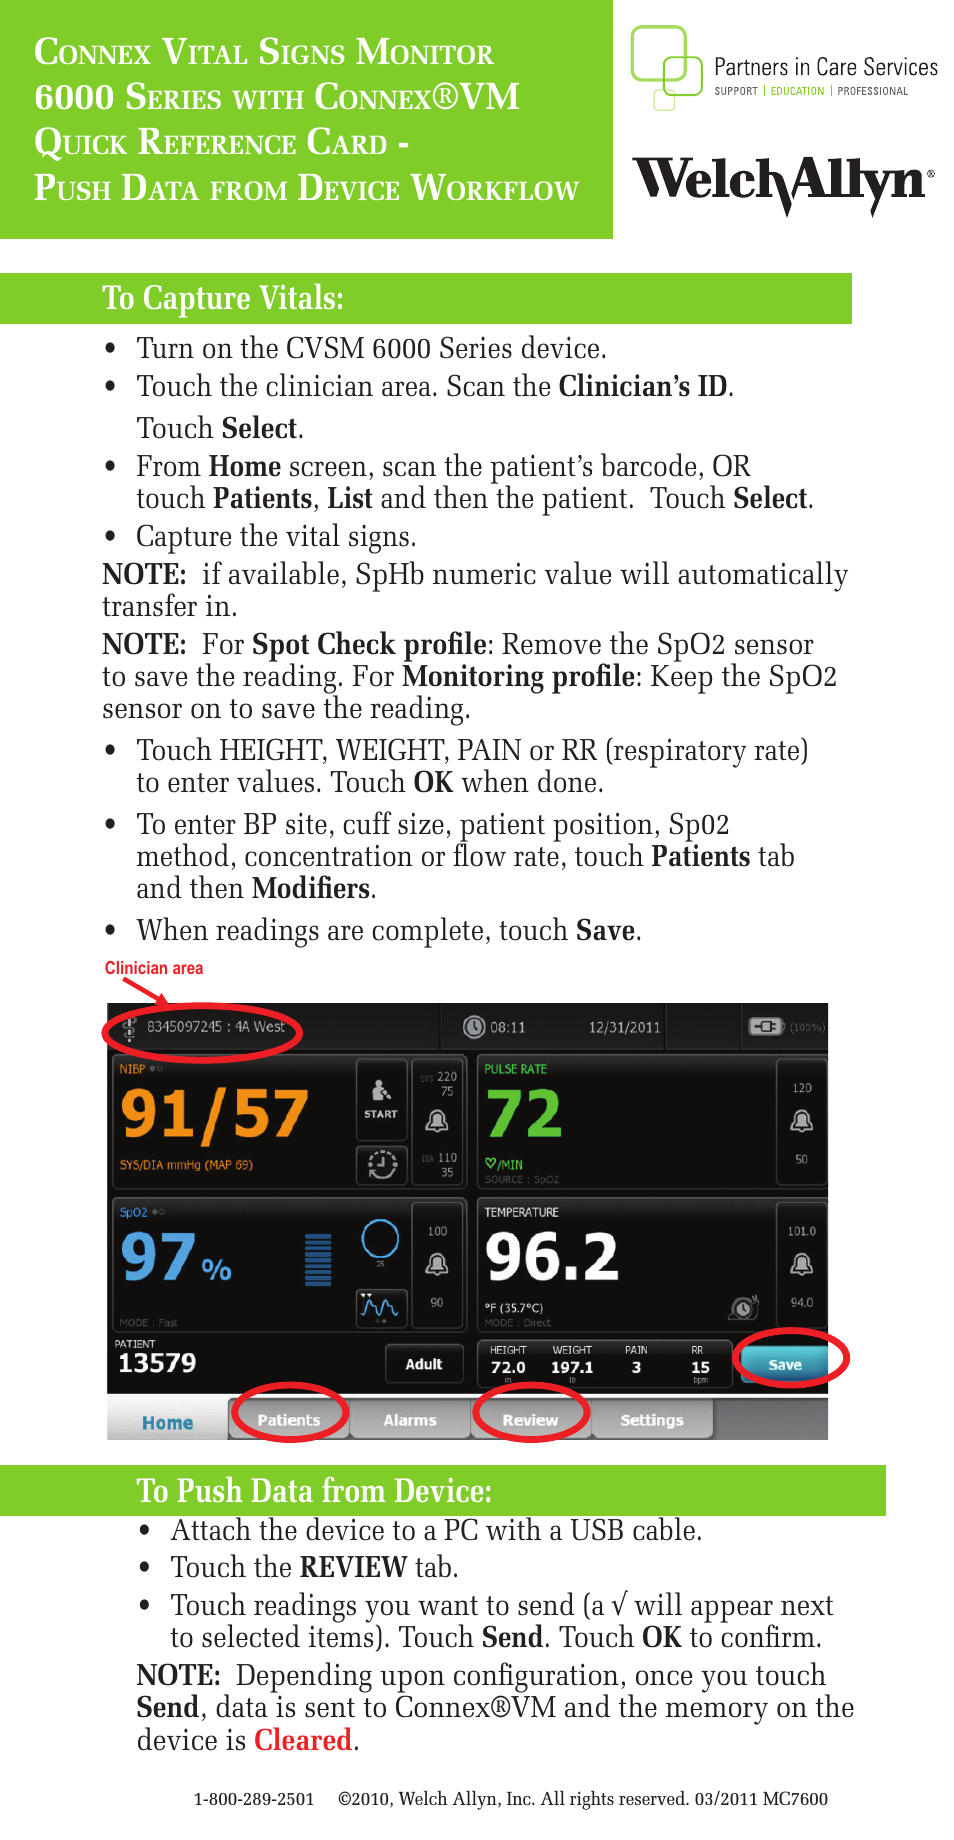 Connex Vital Signs Monitor 6000 Series with ConnexVM - Push Data from Device Workflow - Quick Reference Guide